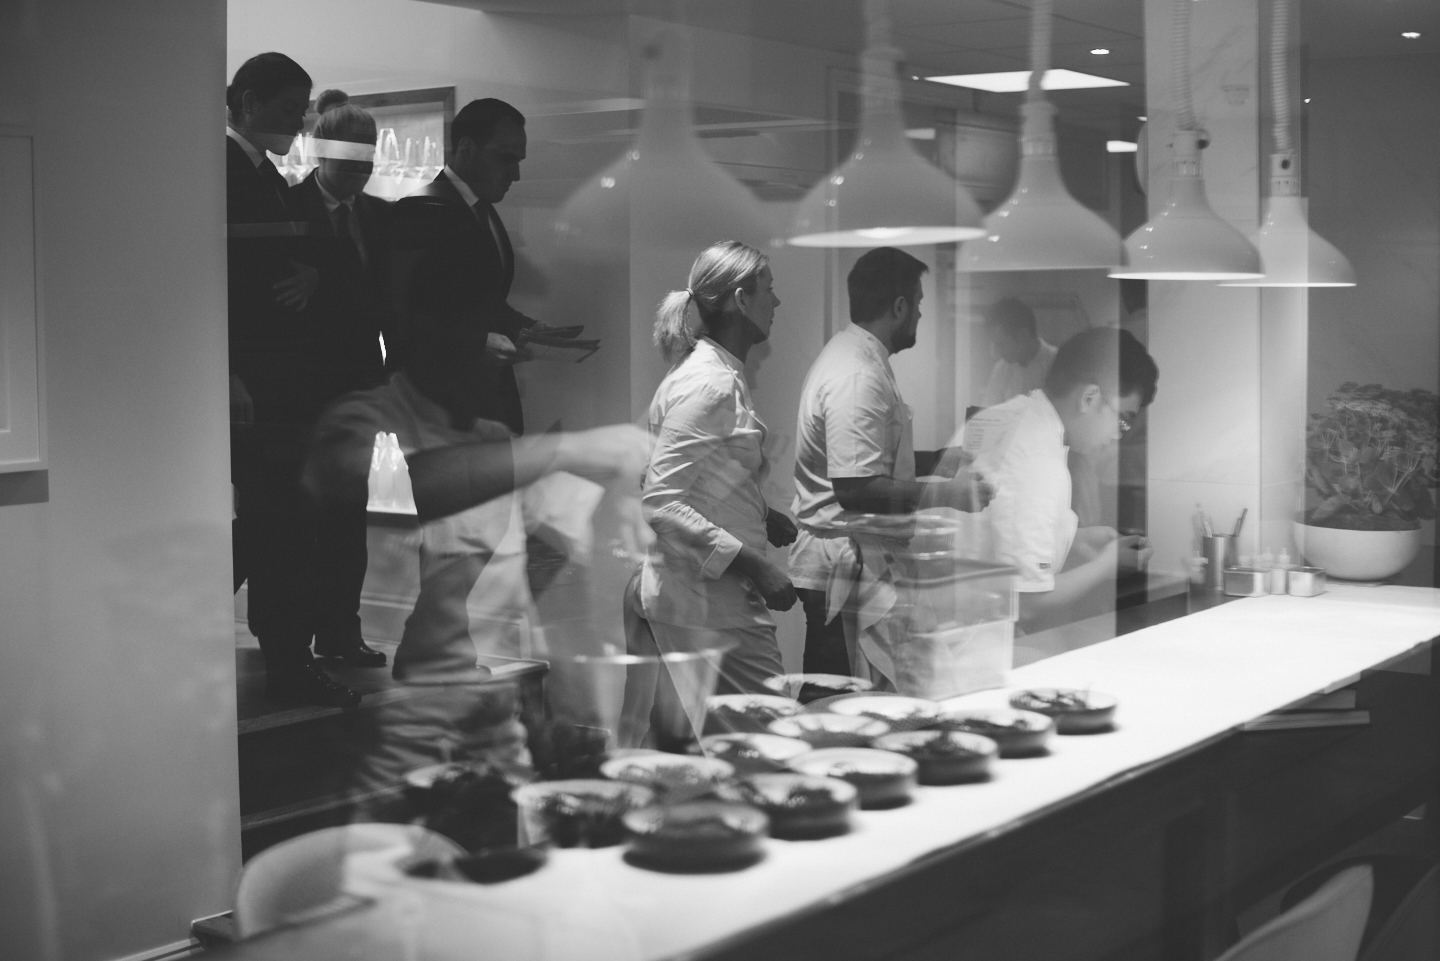 Chefs, waiters, and the pass at two Michelin star restaurant Core by Clare Smyth in Notting Hill, London